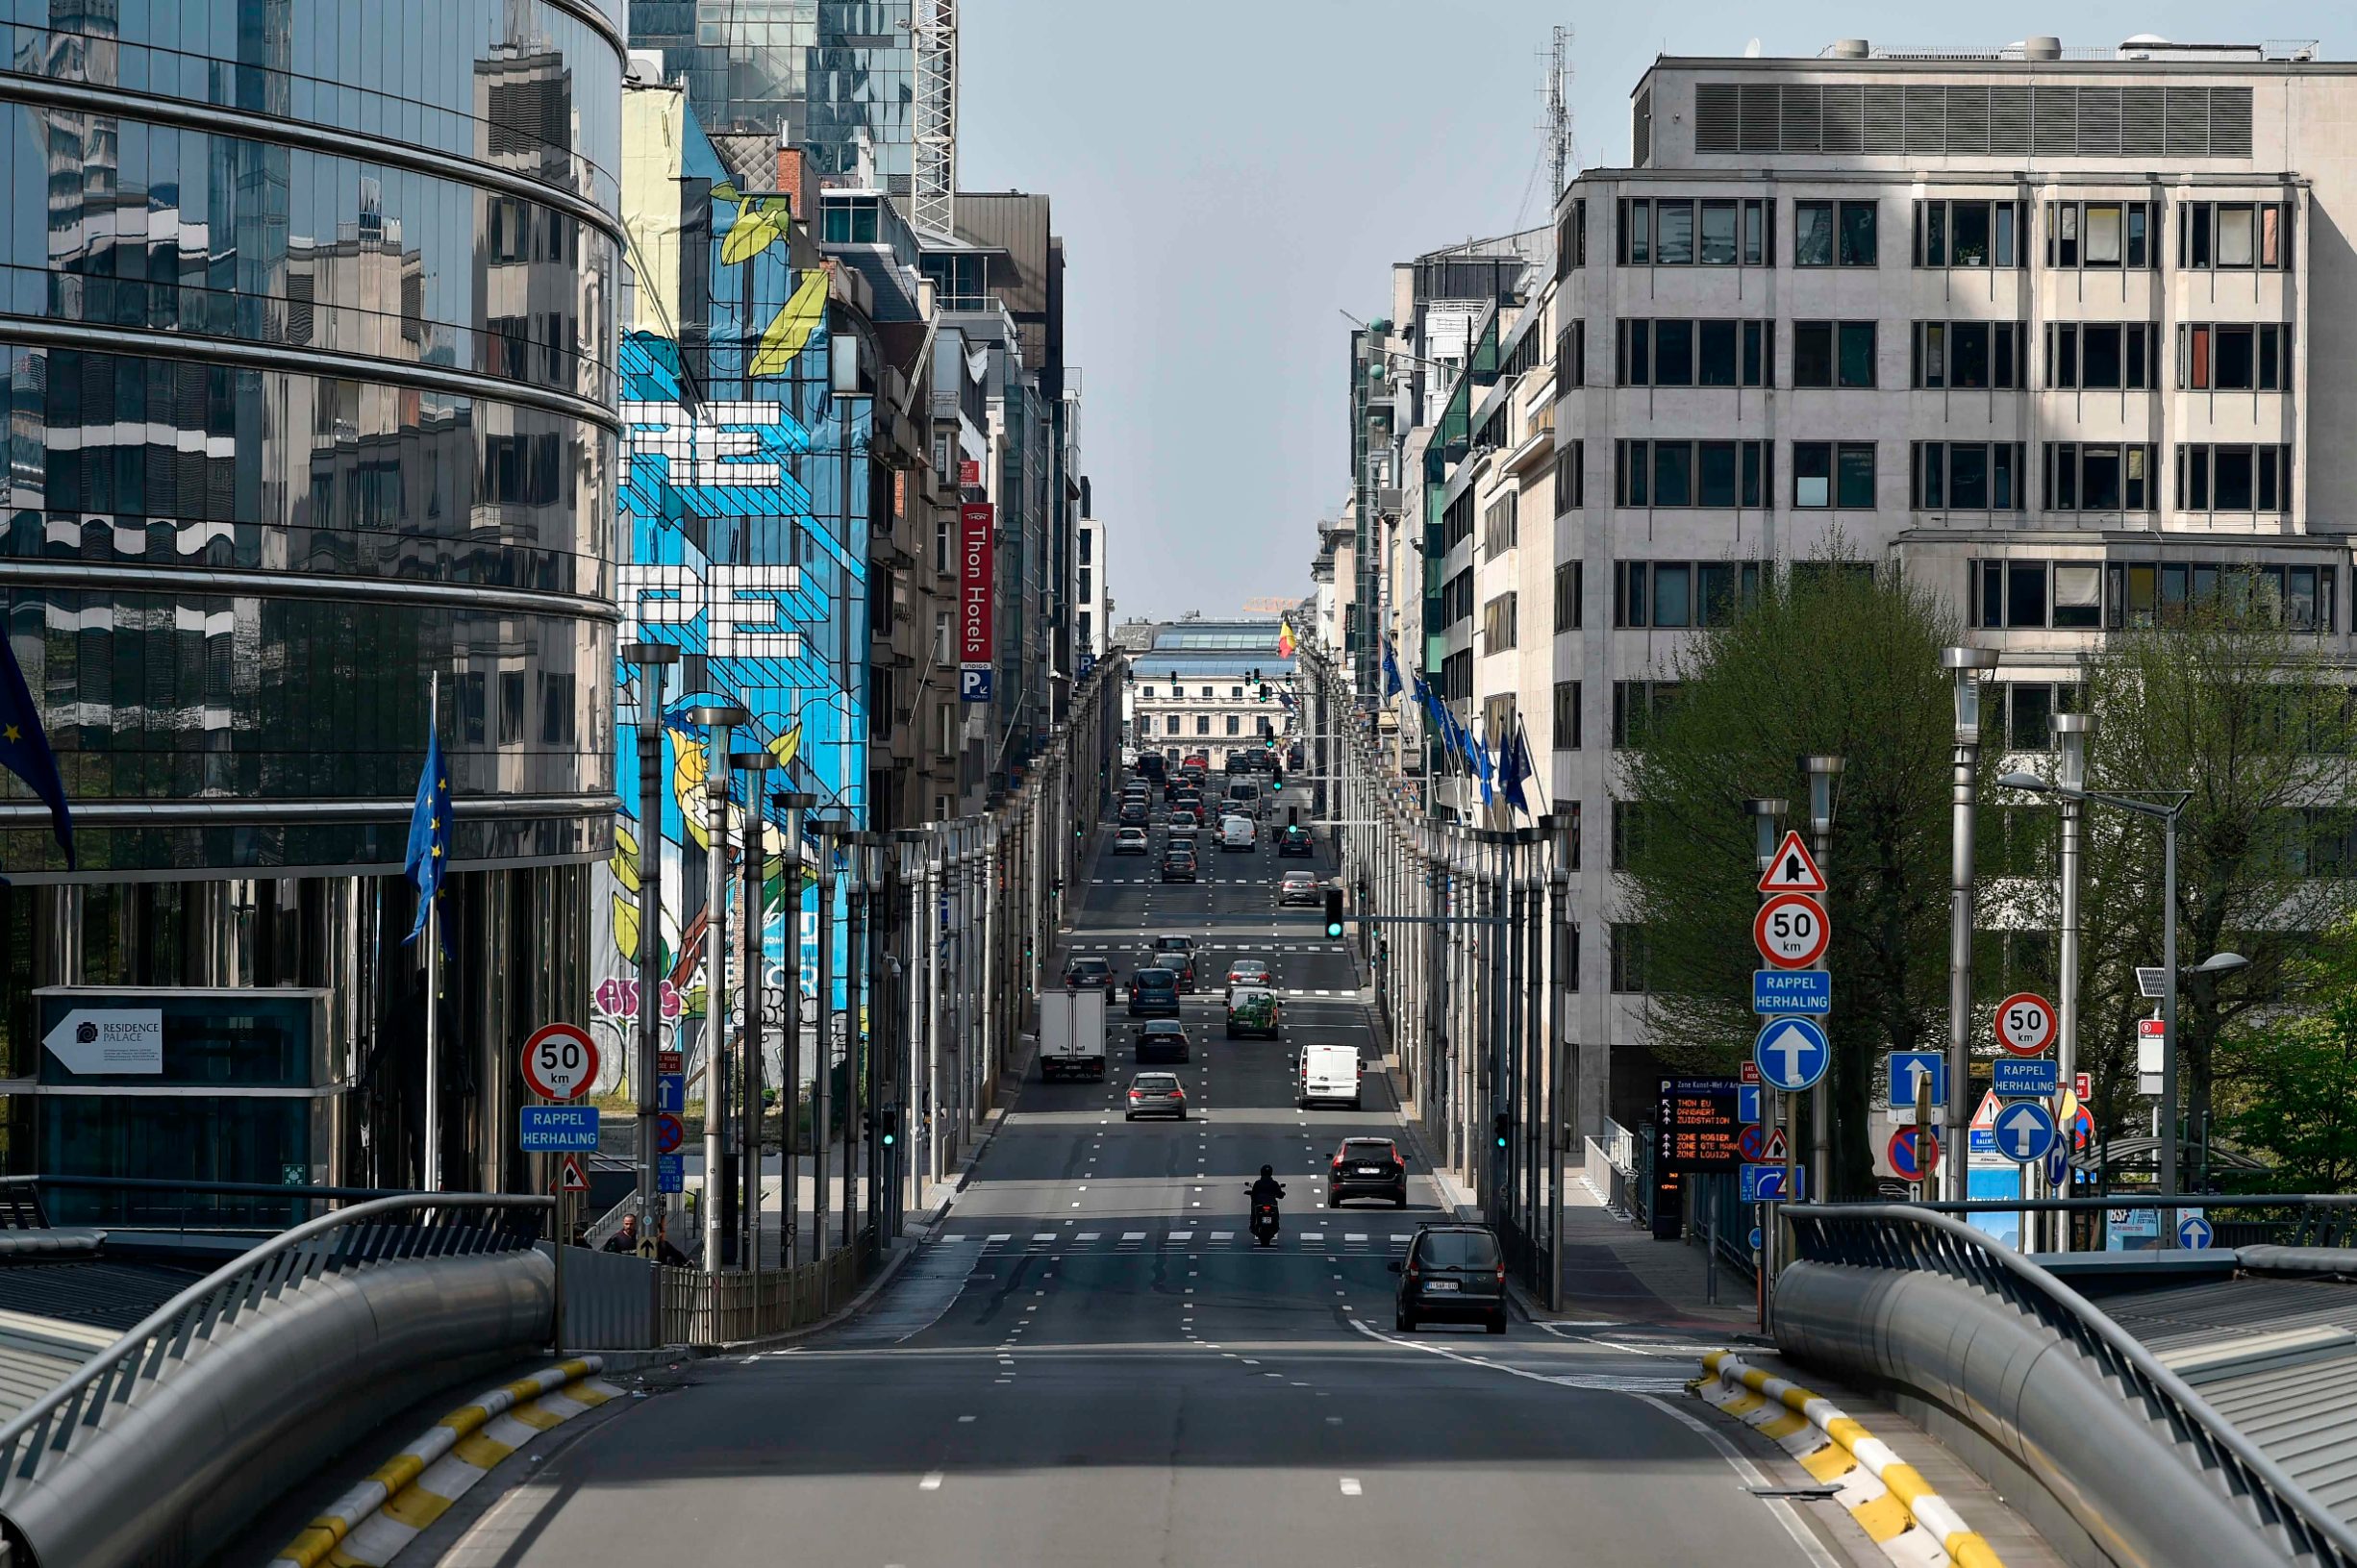 A picture taken on April 15, 2020 shows a street of Brussels, as a strict lockdown has been in place for the past five weeks to stop the spread of COVID-19, the disease caused by the novel coronavirus. (Photo by JOHN THYS / AFP)